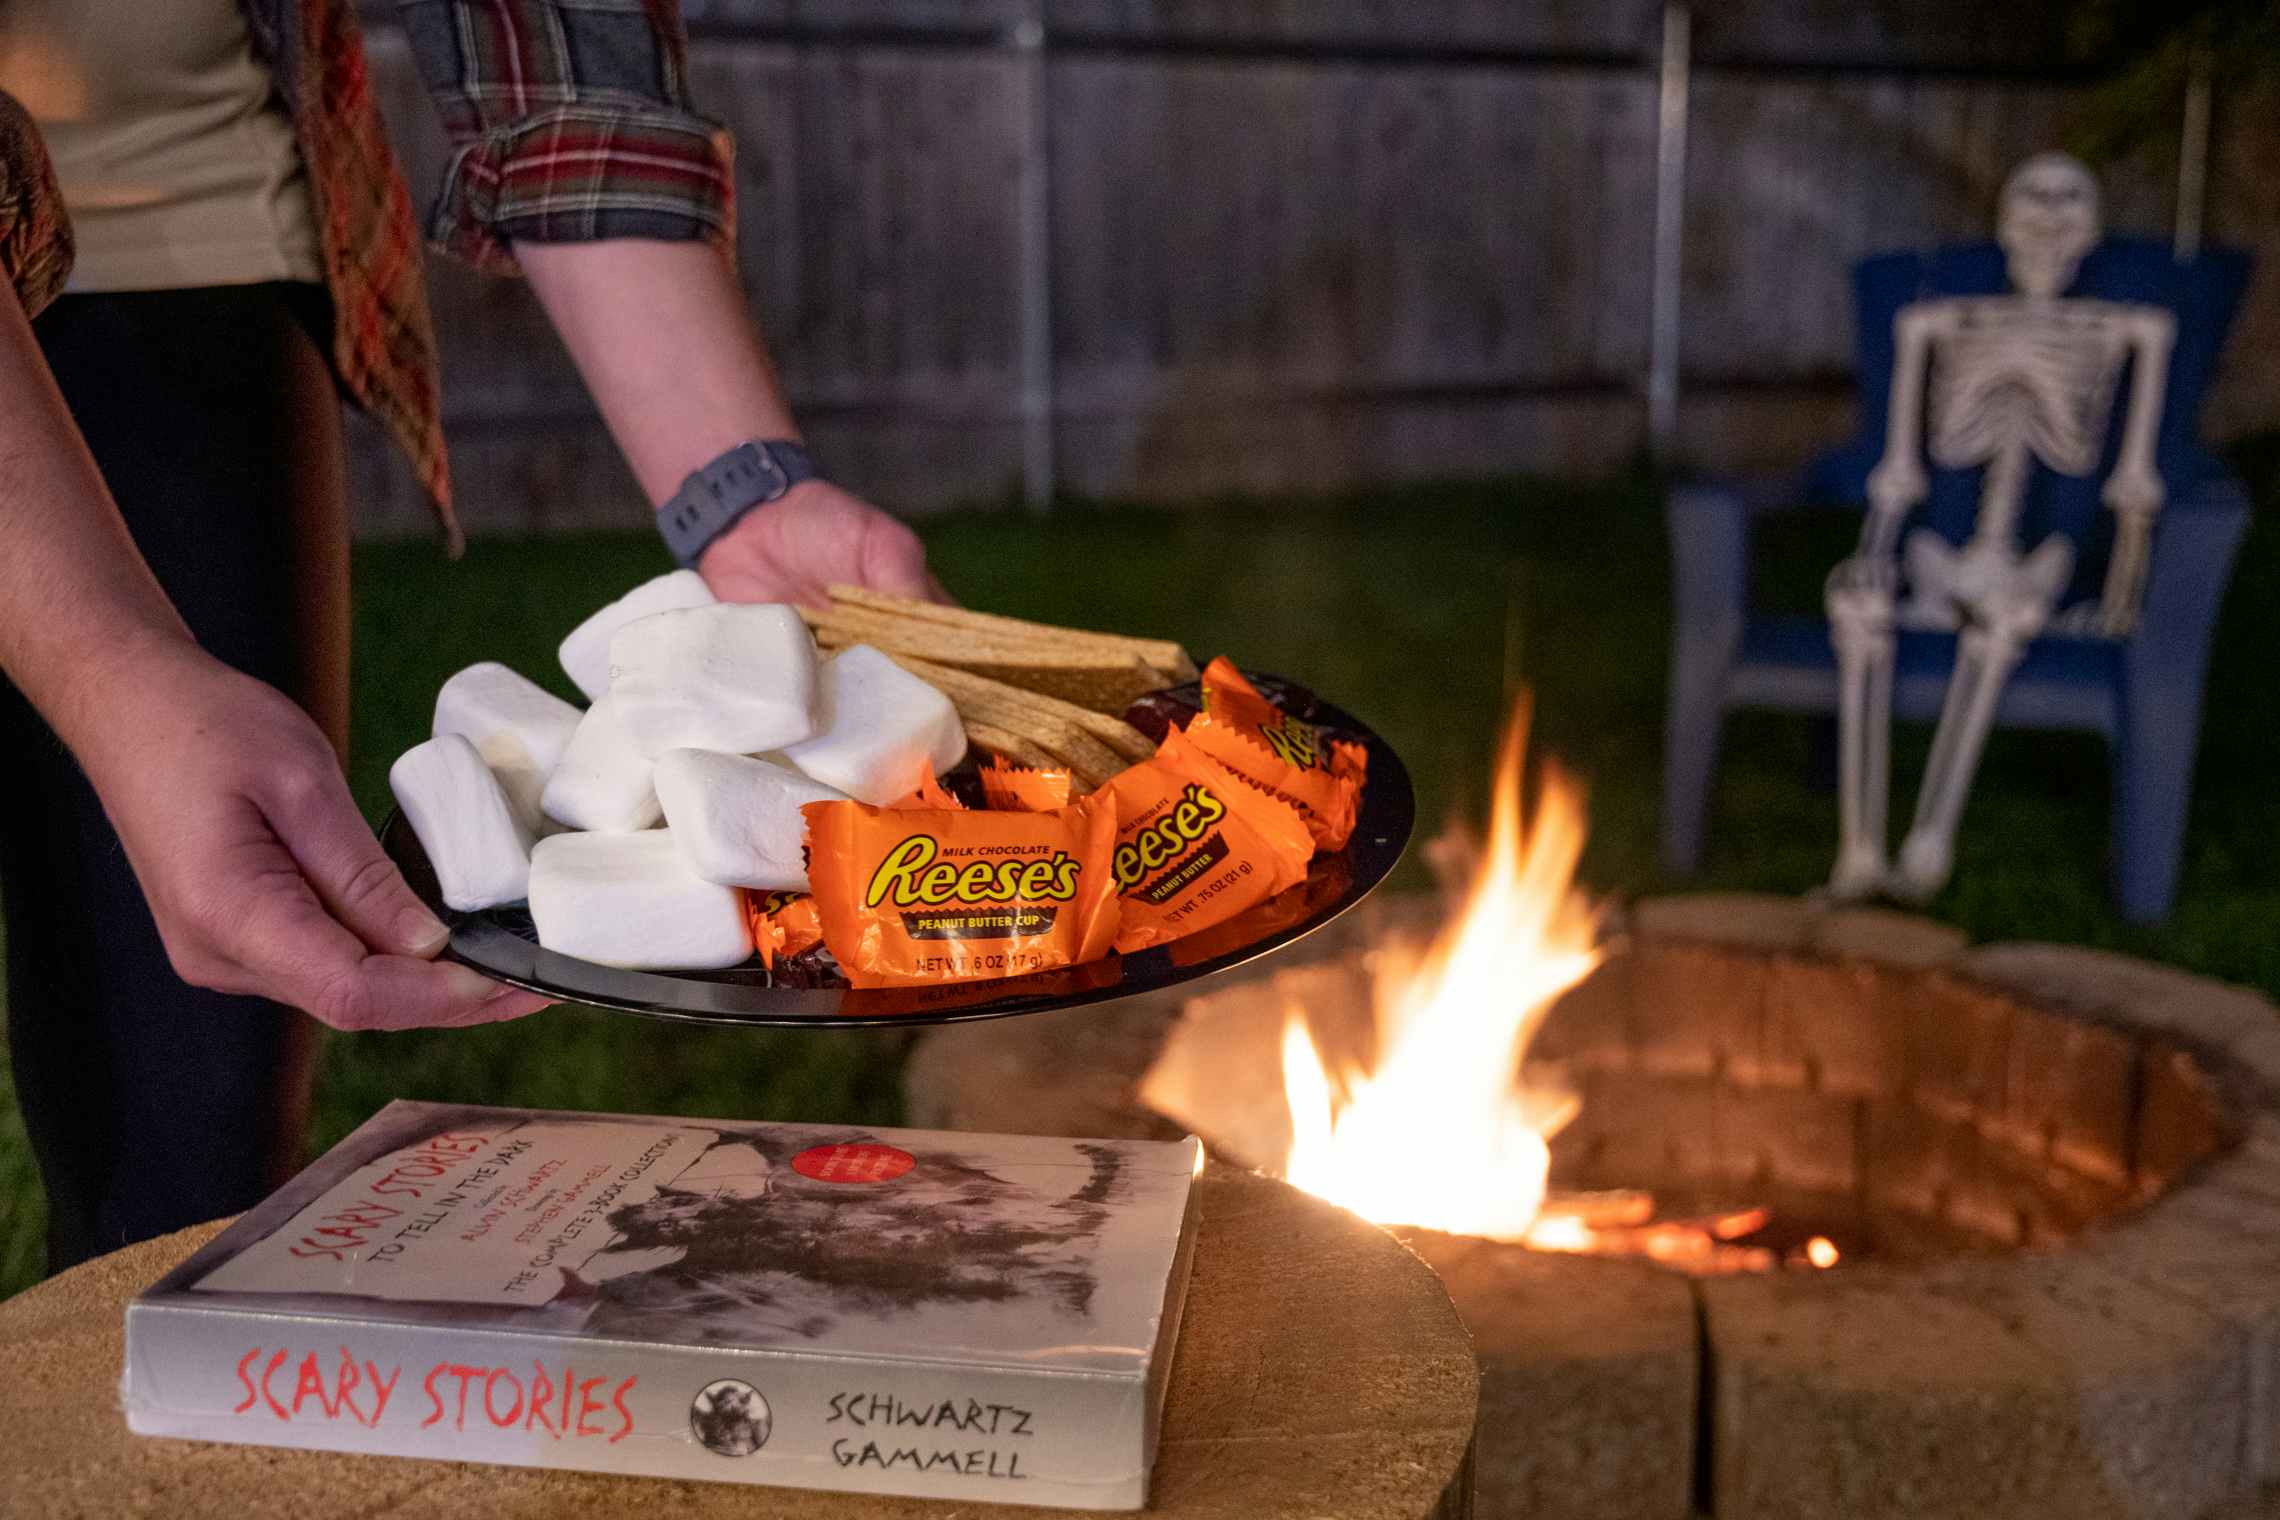 A person holding a plate of graham crackers, chocolate Reese's peanut butter cups and, marshmallows next to a fire pit and Scary Stories books, with a plastic skeleton on a chair in the background.